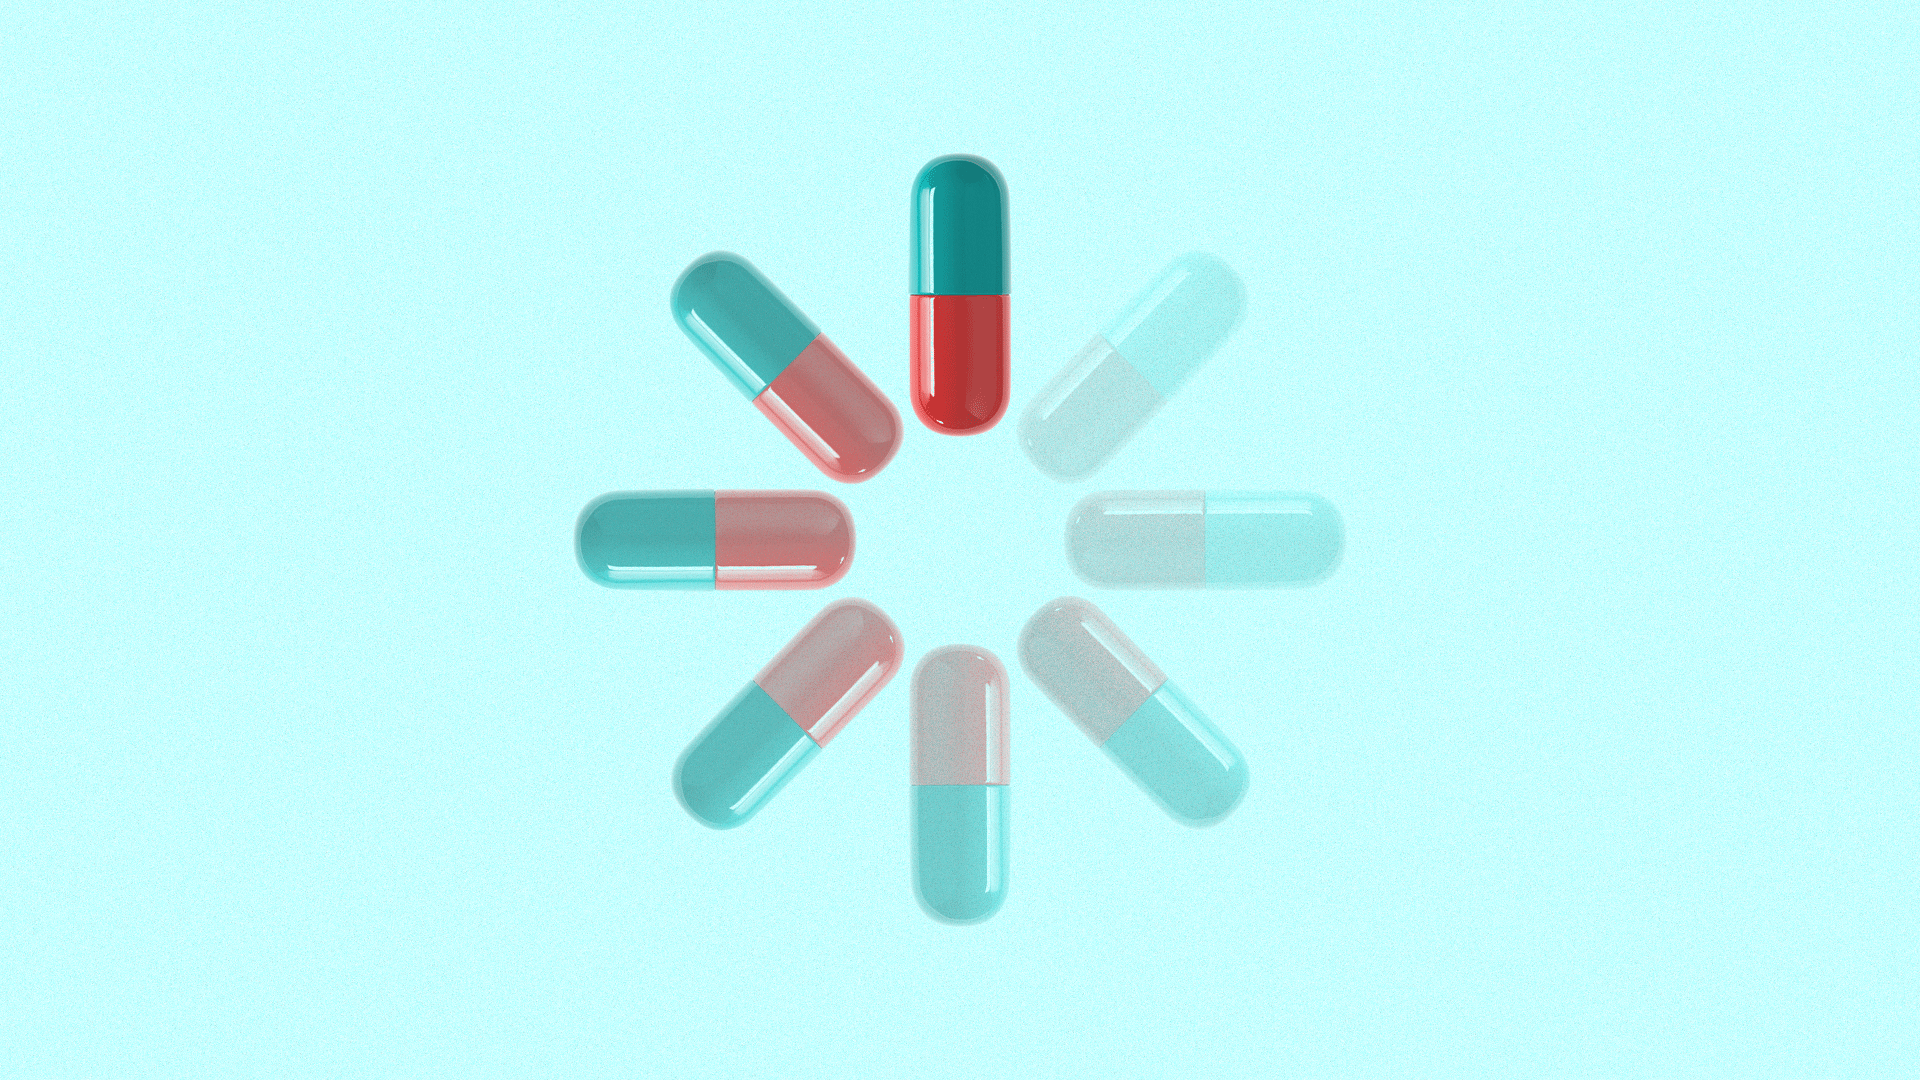 an illustration of a loading symbol made up of pills 